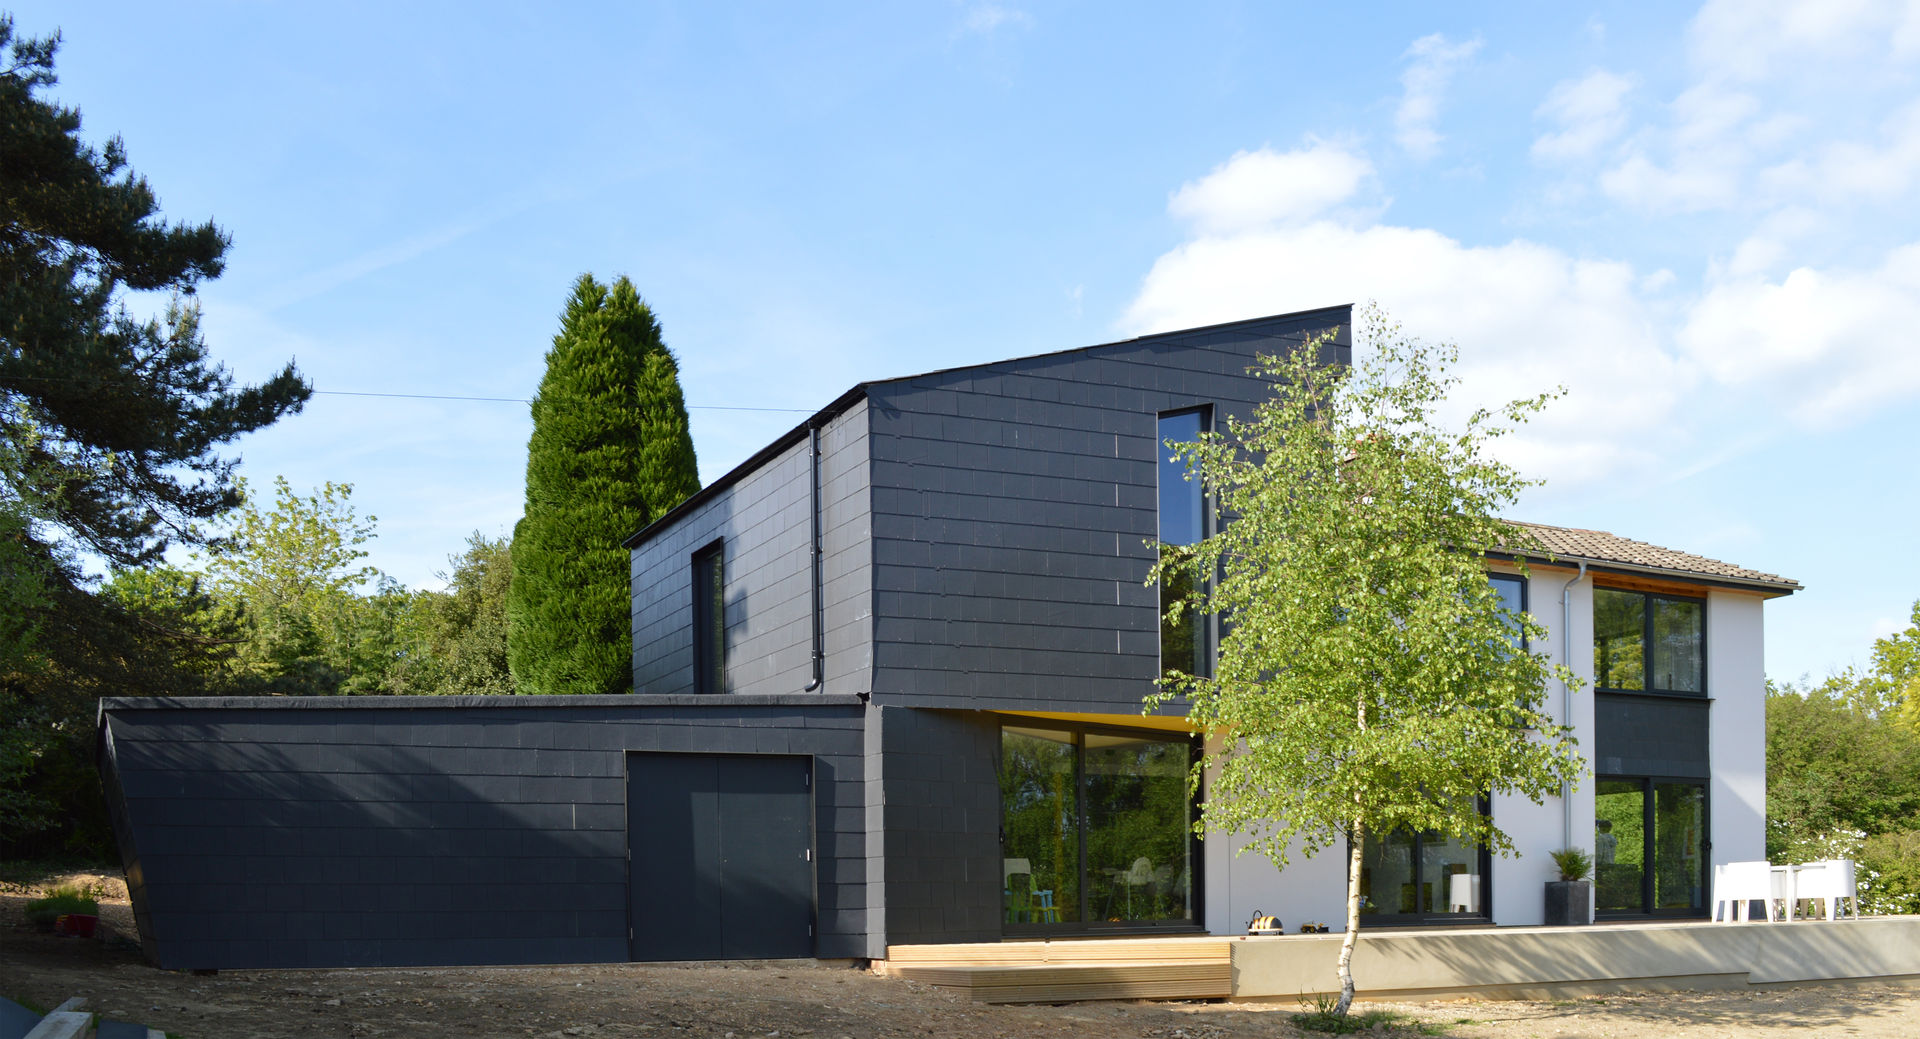 Transforming a 1960s Detached Property, Haslemere, Surrey, ArchitectureLIVE ArchitectureLIVE Modern houses